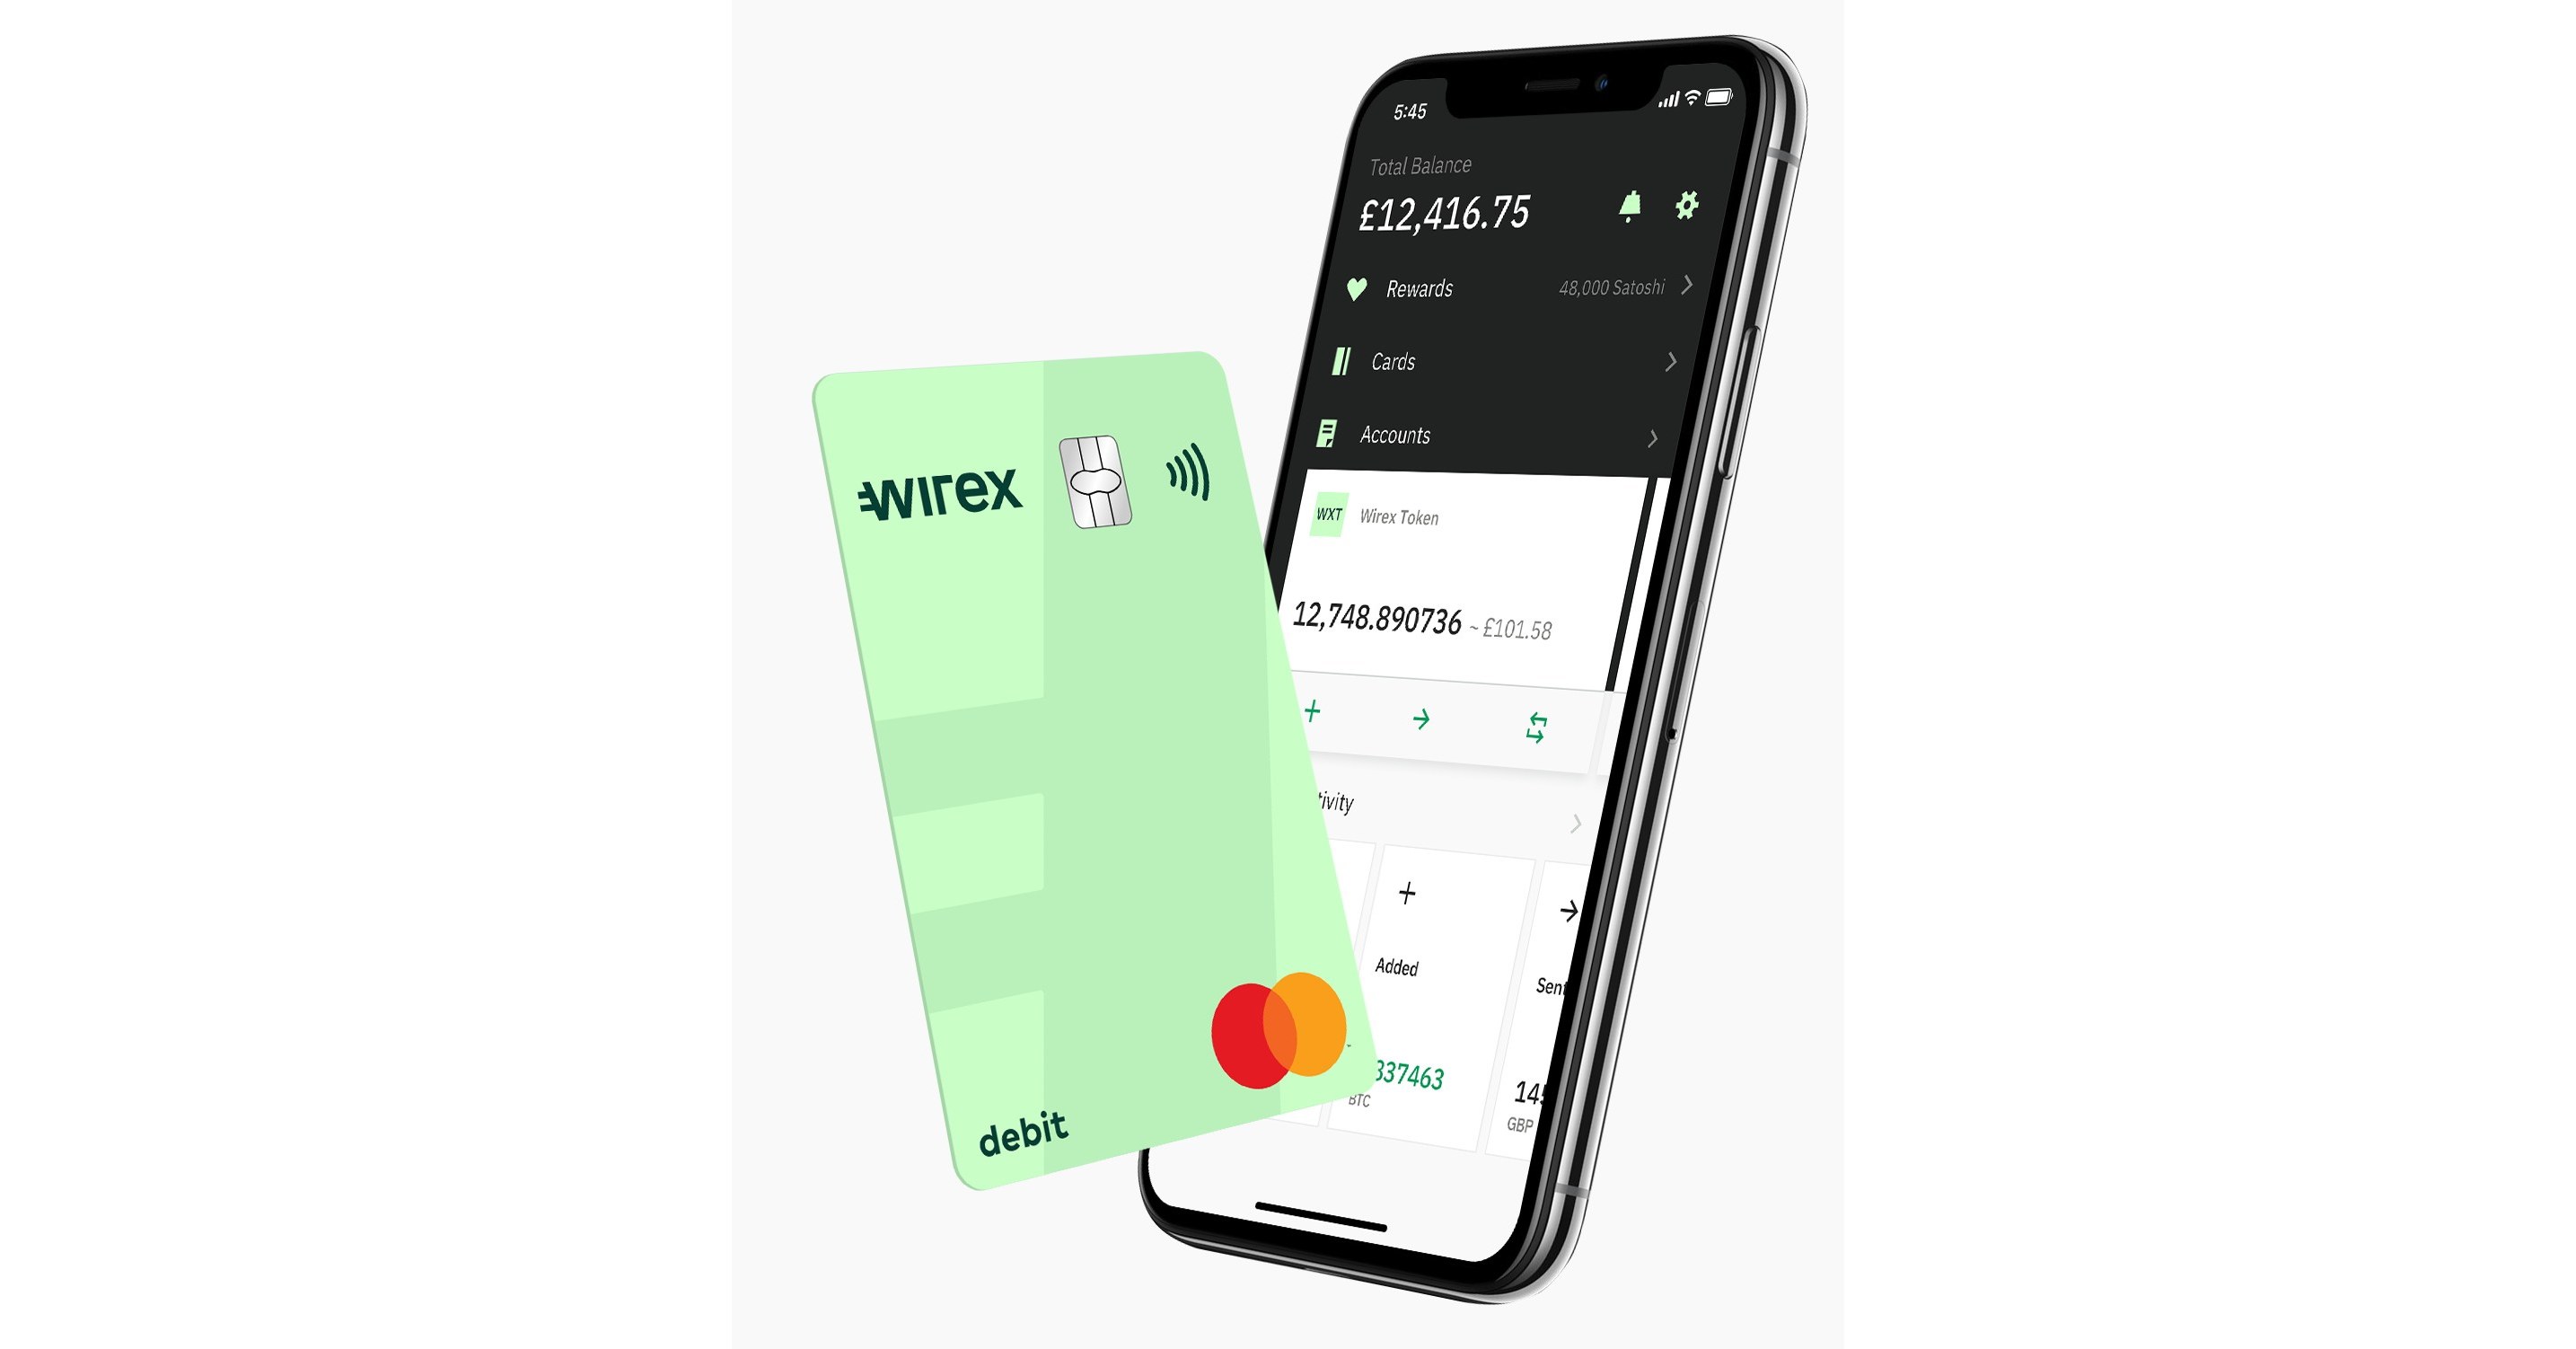 Wirex Introduces Global Crypto Accounts for Businesses – Services Bitcoin  News